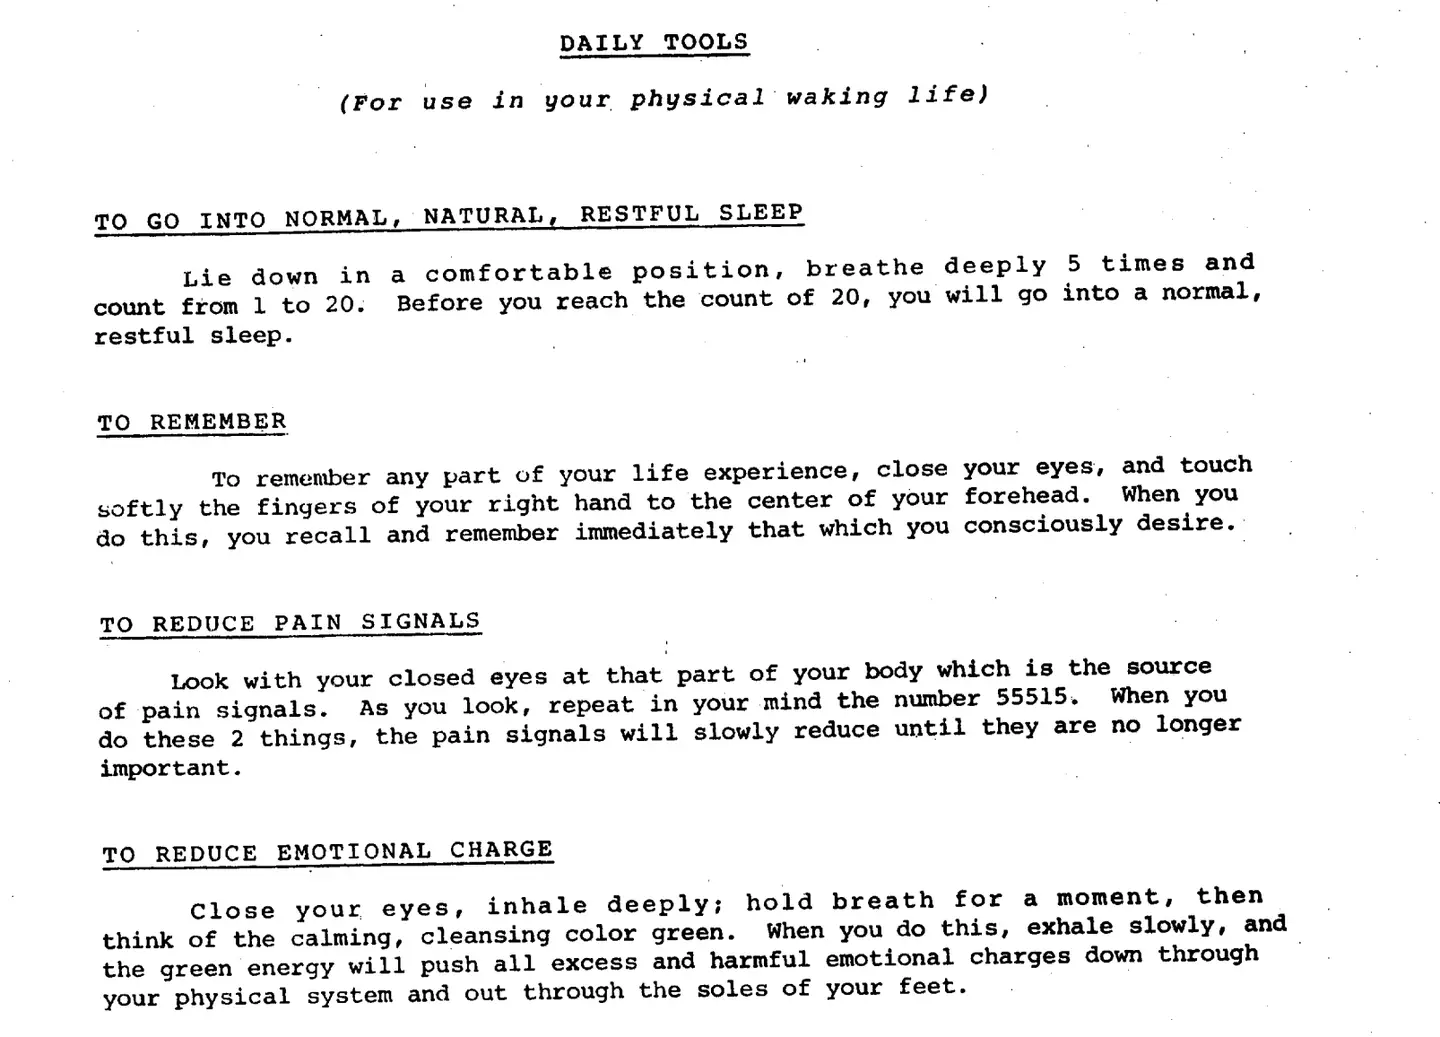 The tip comes from this CIA document.